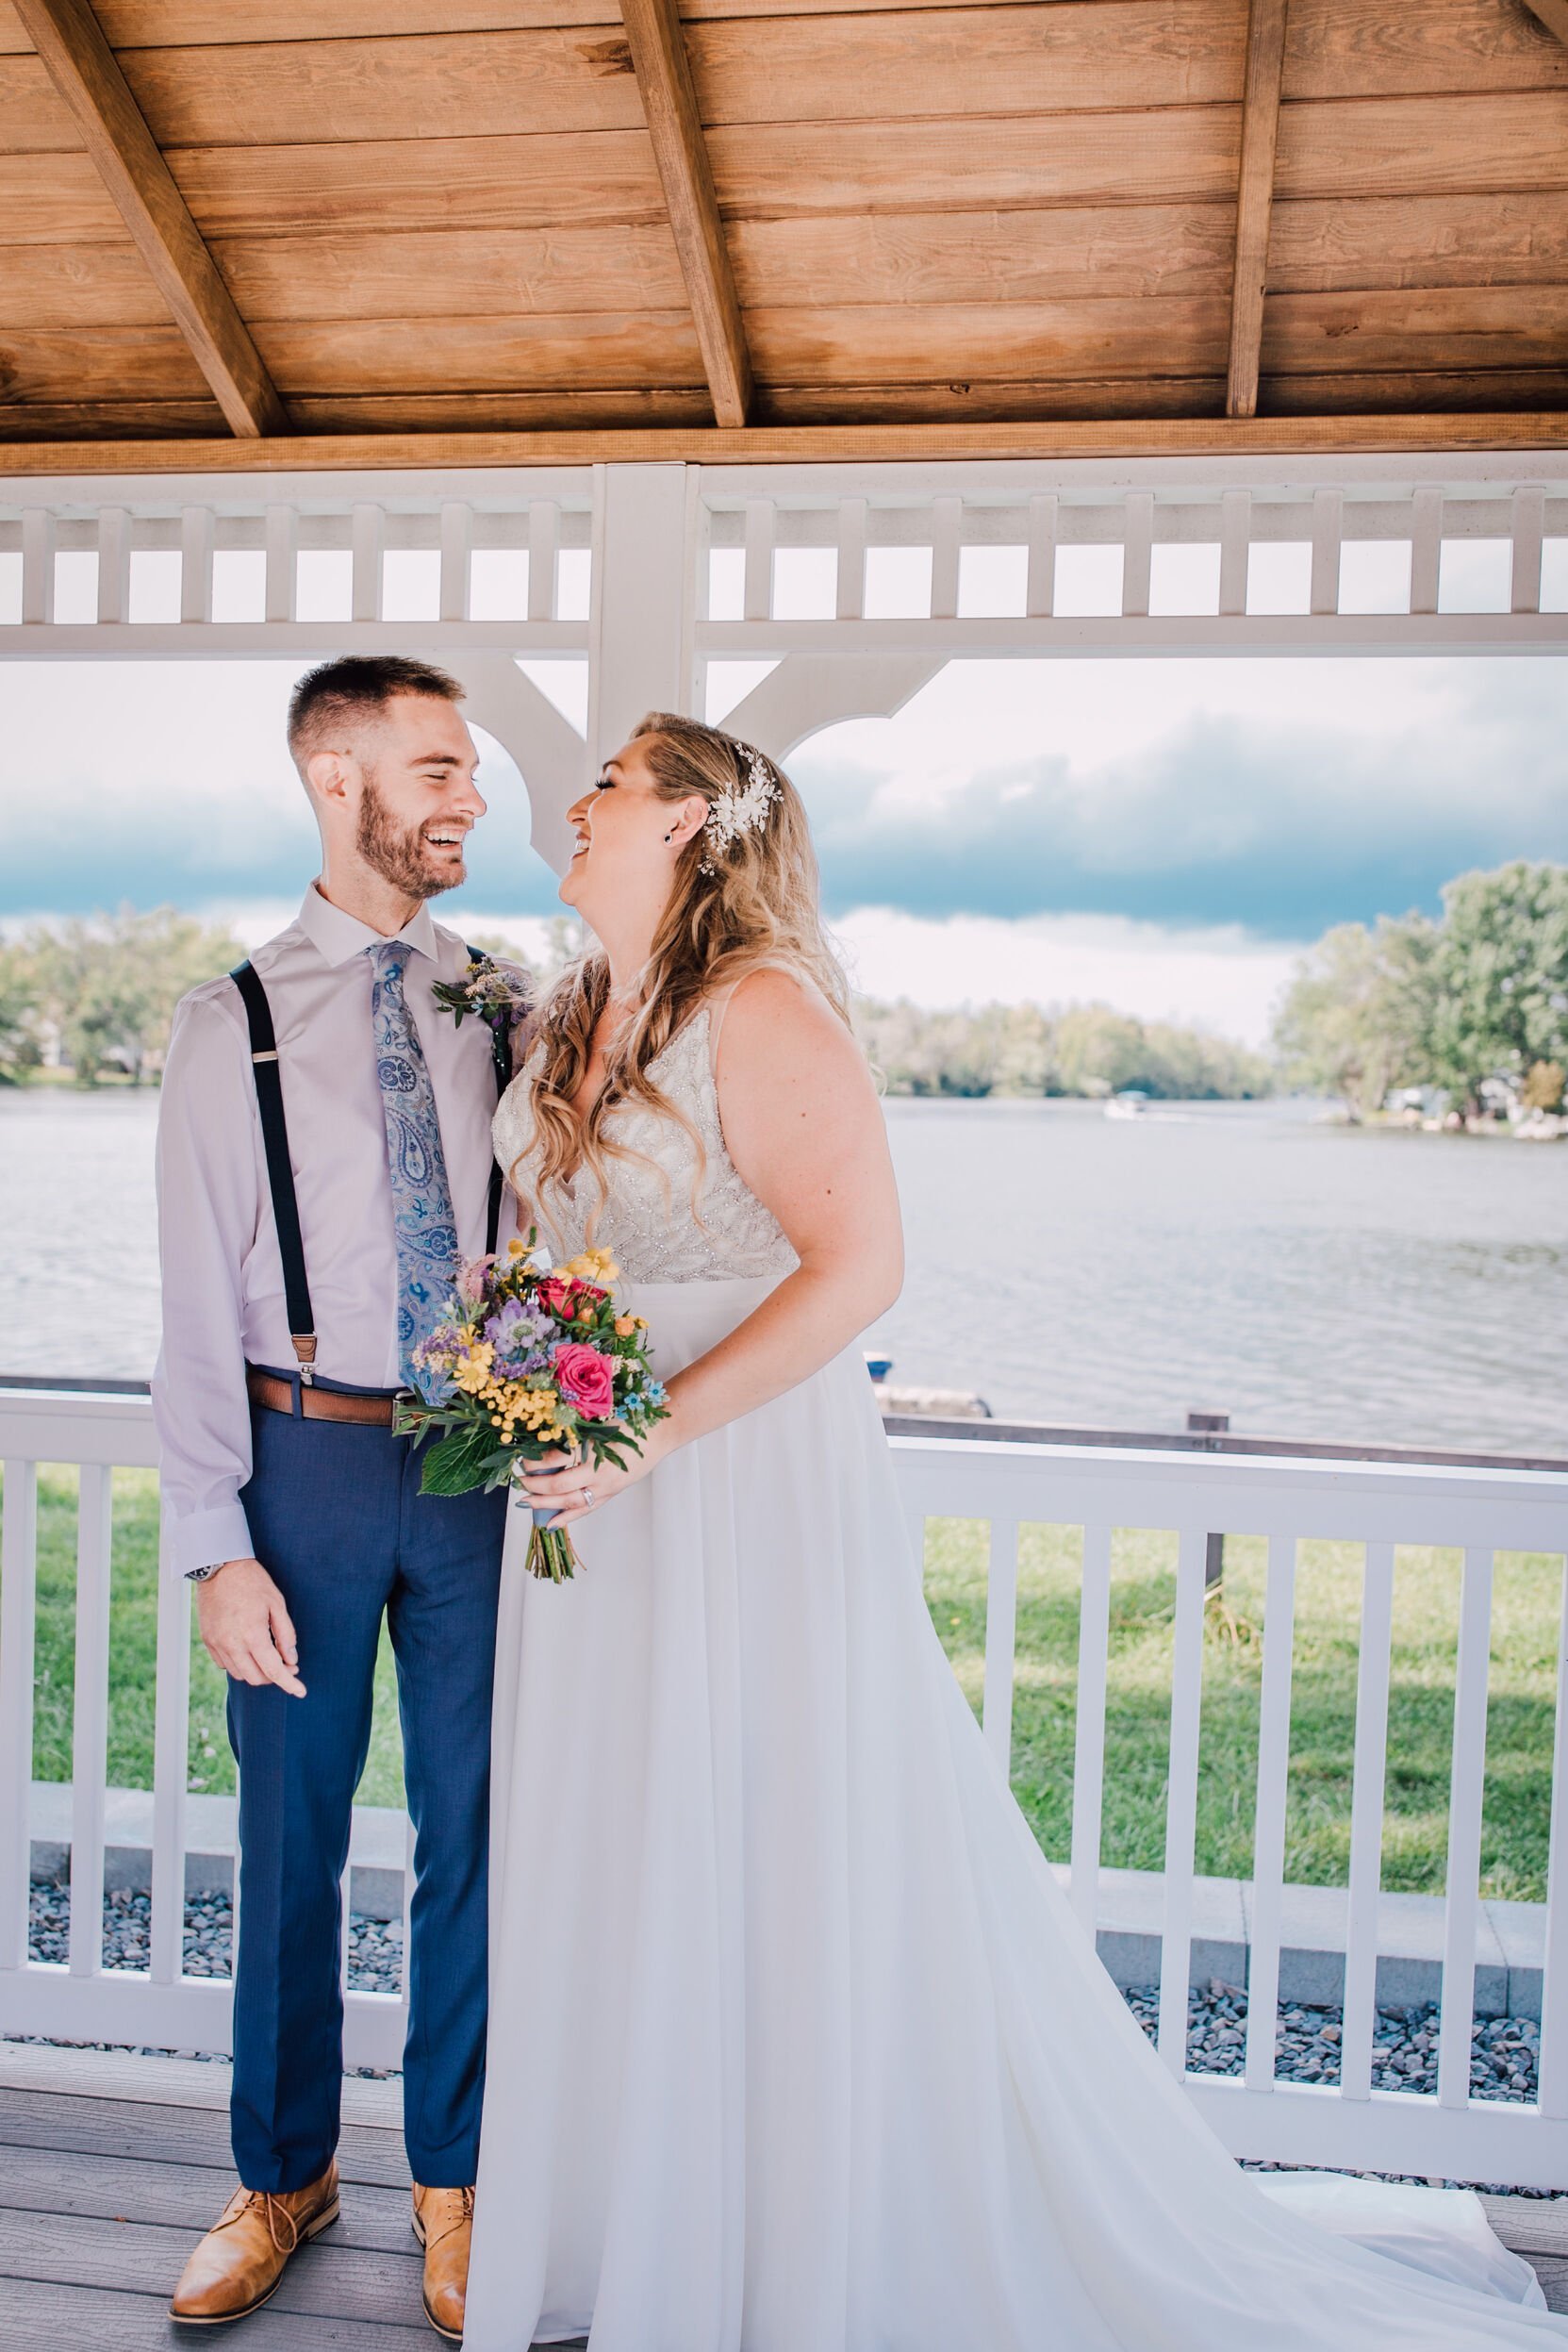  Bride and groom smile at each other on a gazebo over looking the water at 3 rivers park 